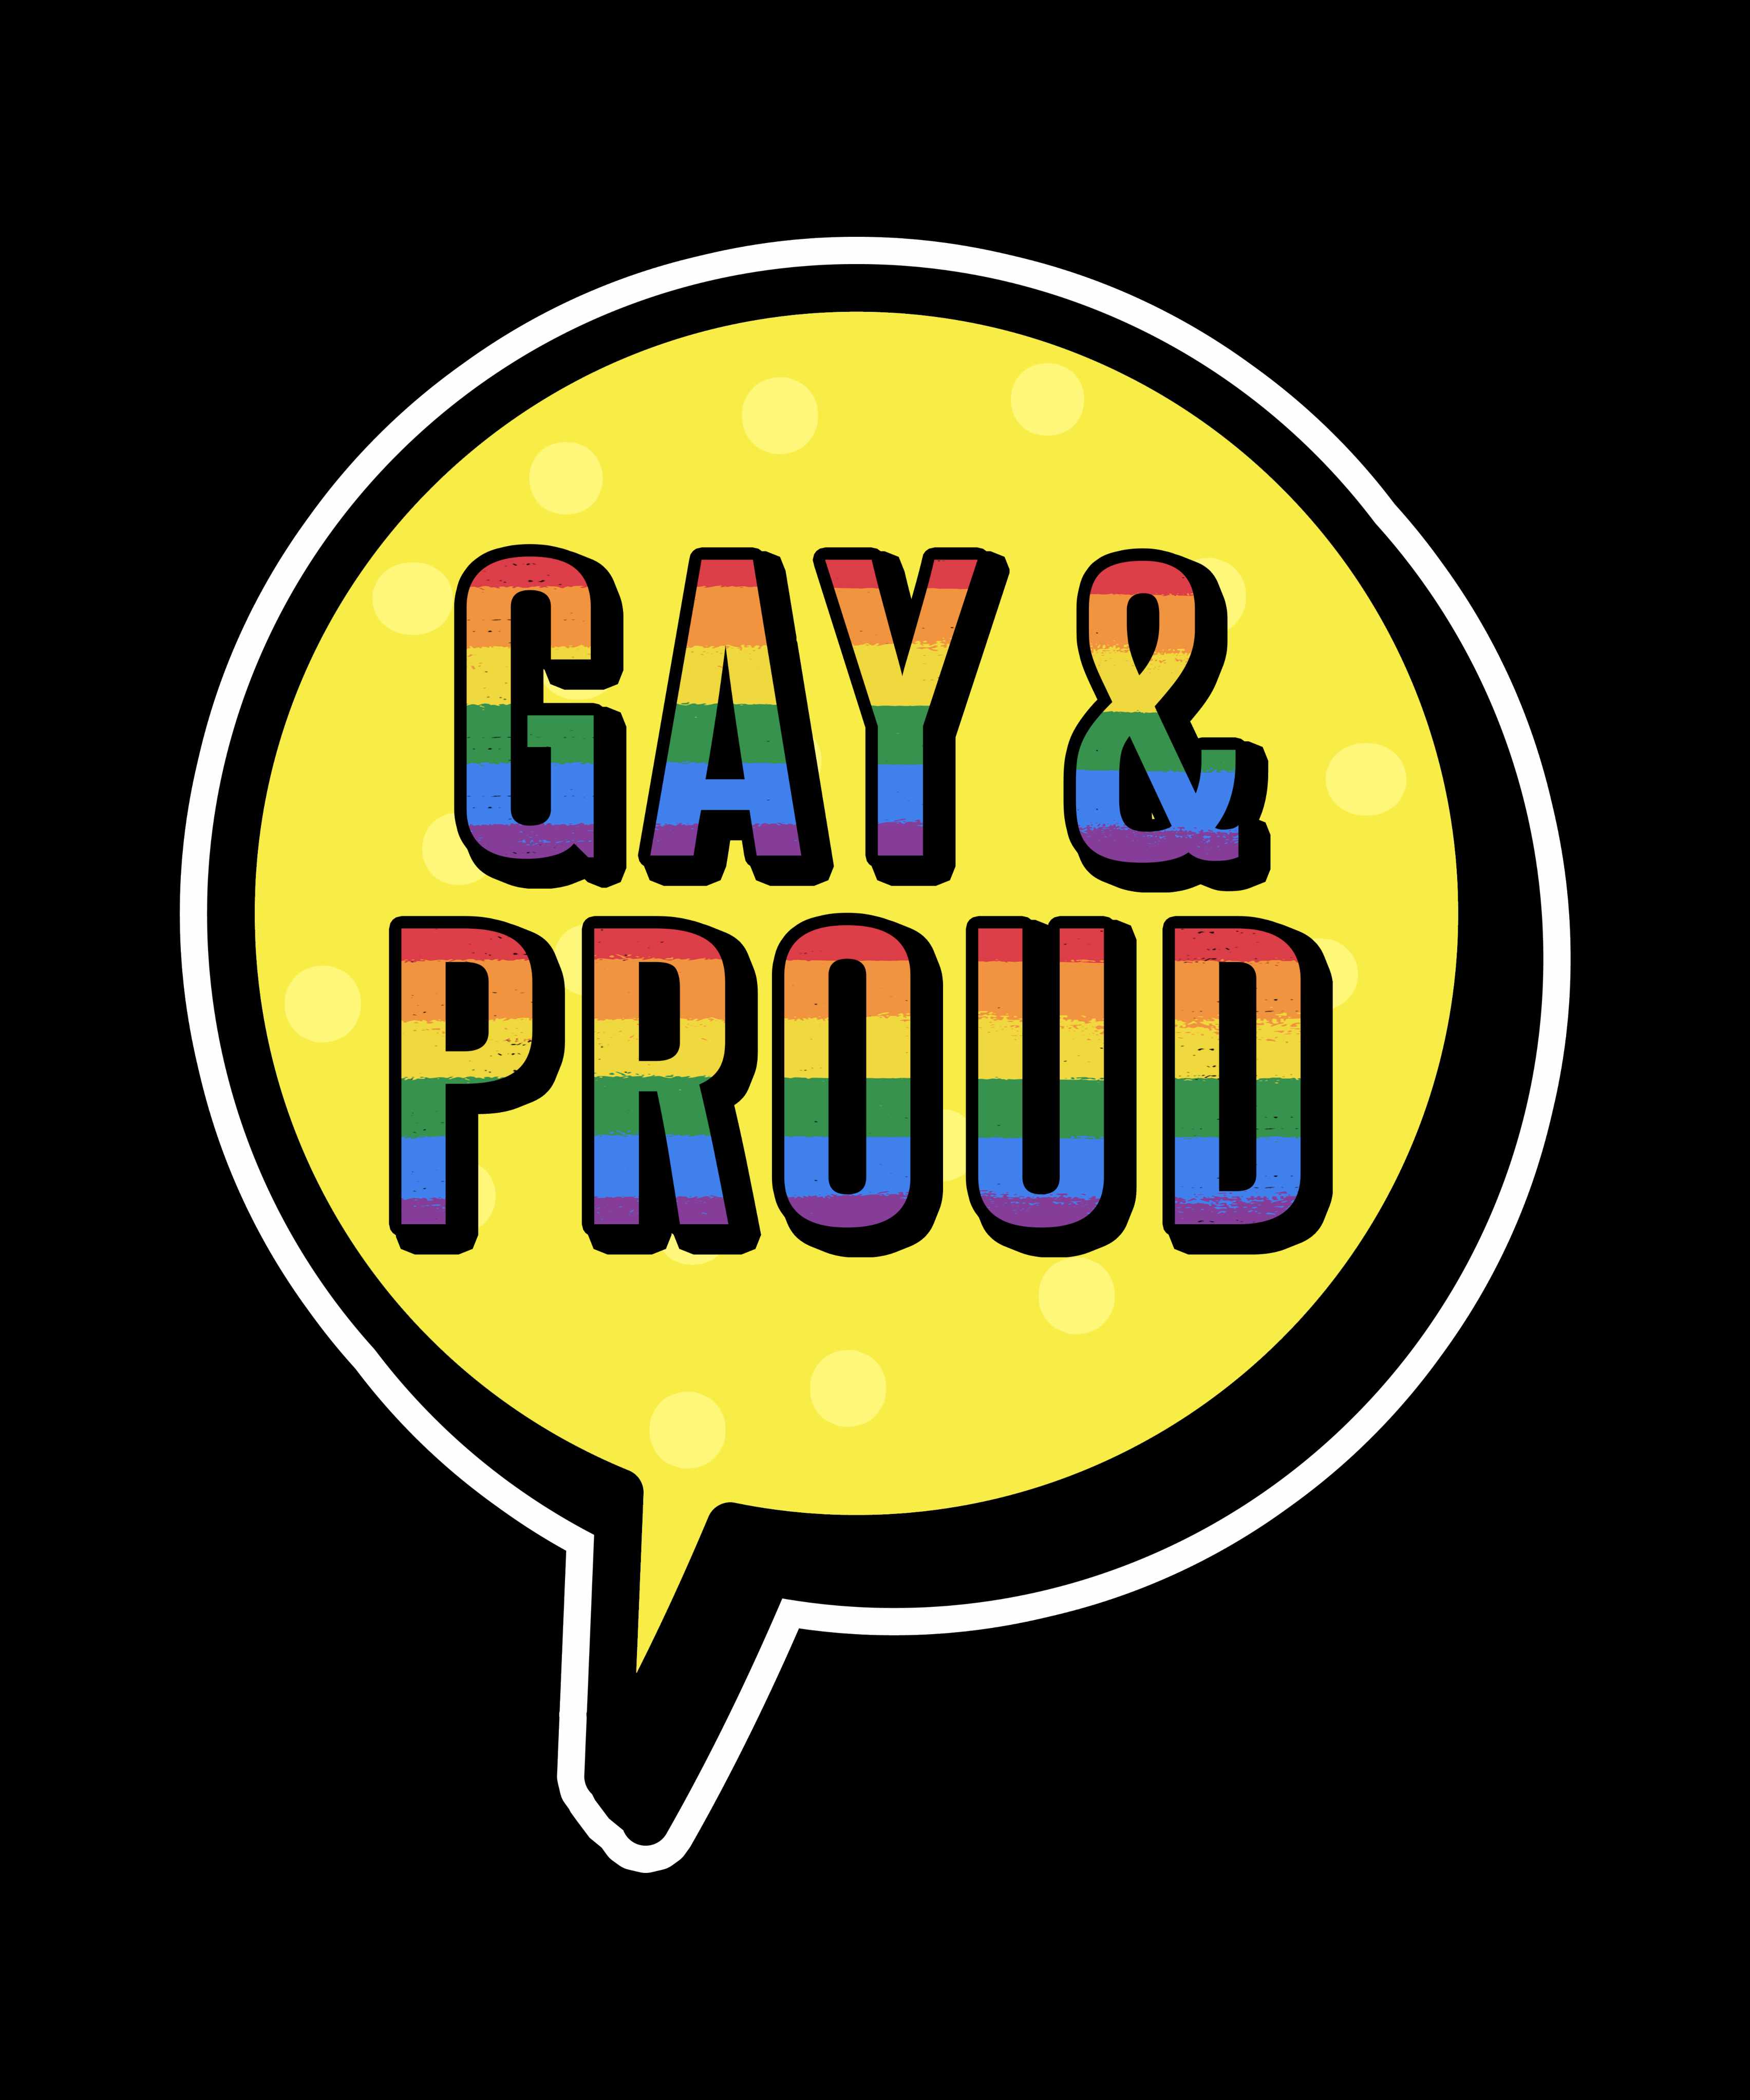 Gay & Proud T-Shirt: A yellow circle with rainbow-colored text, symbolizing pride.